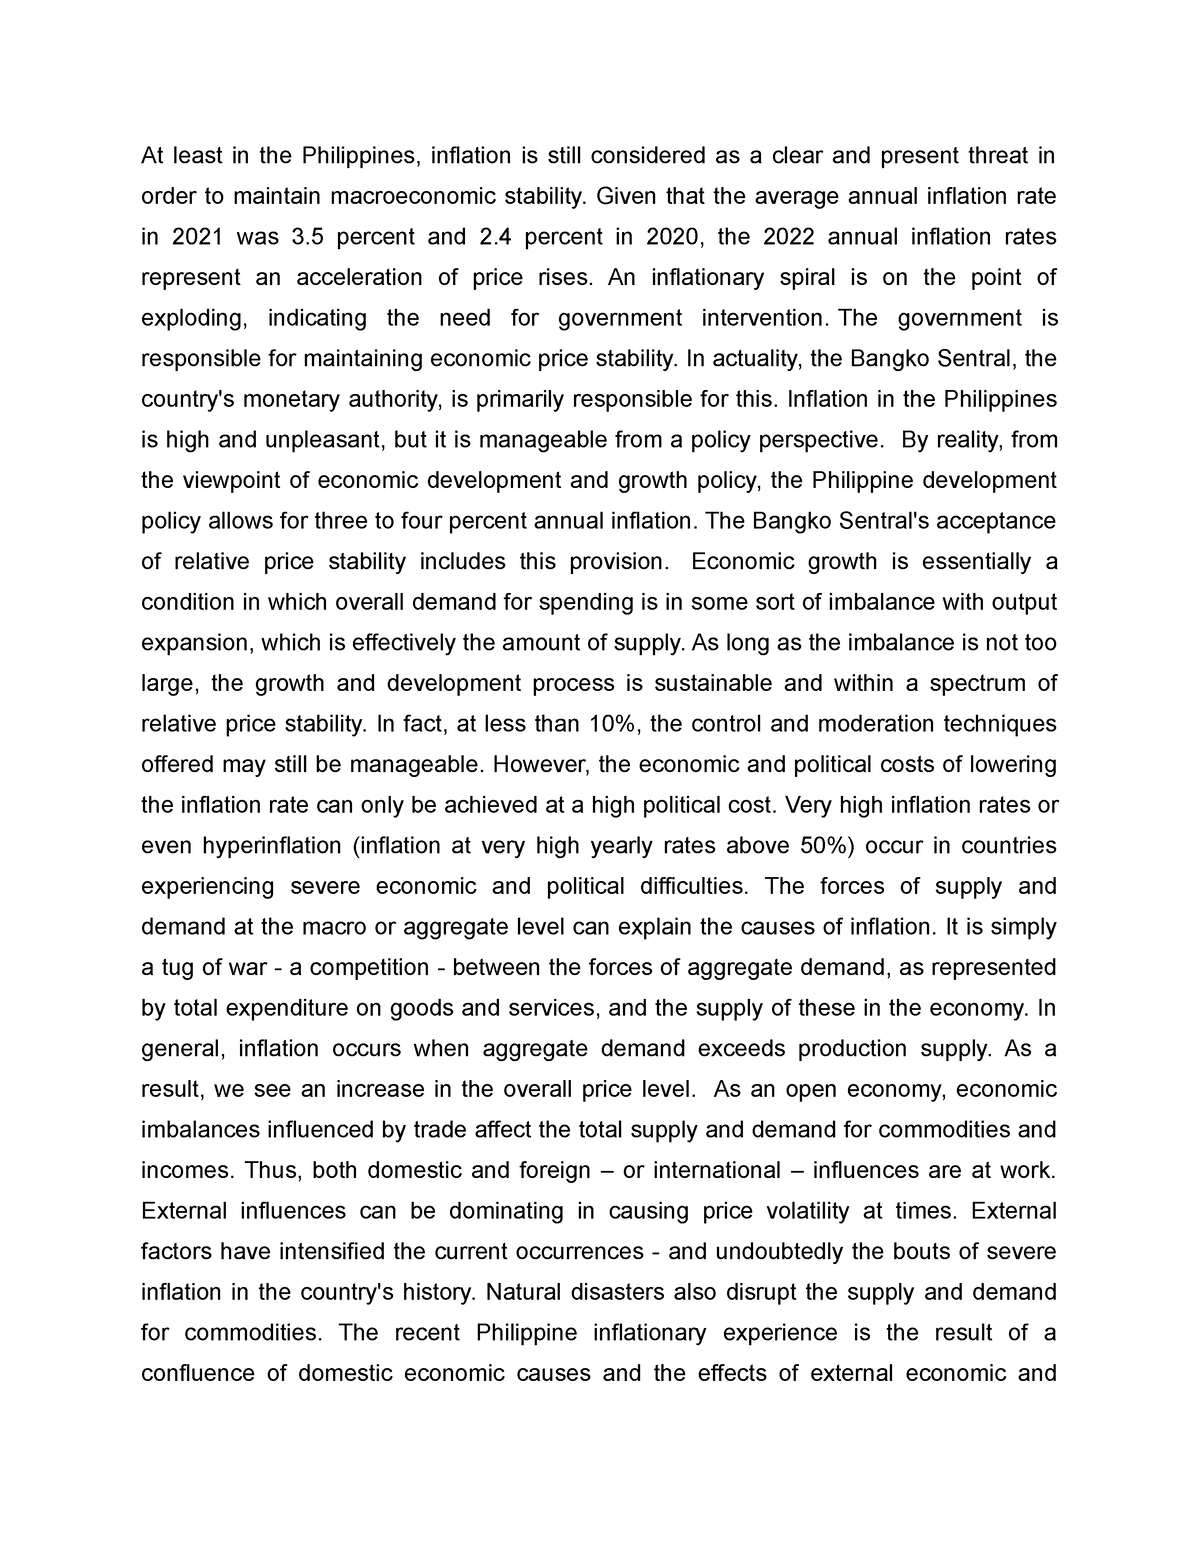 essay on inflation in the philippines